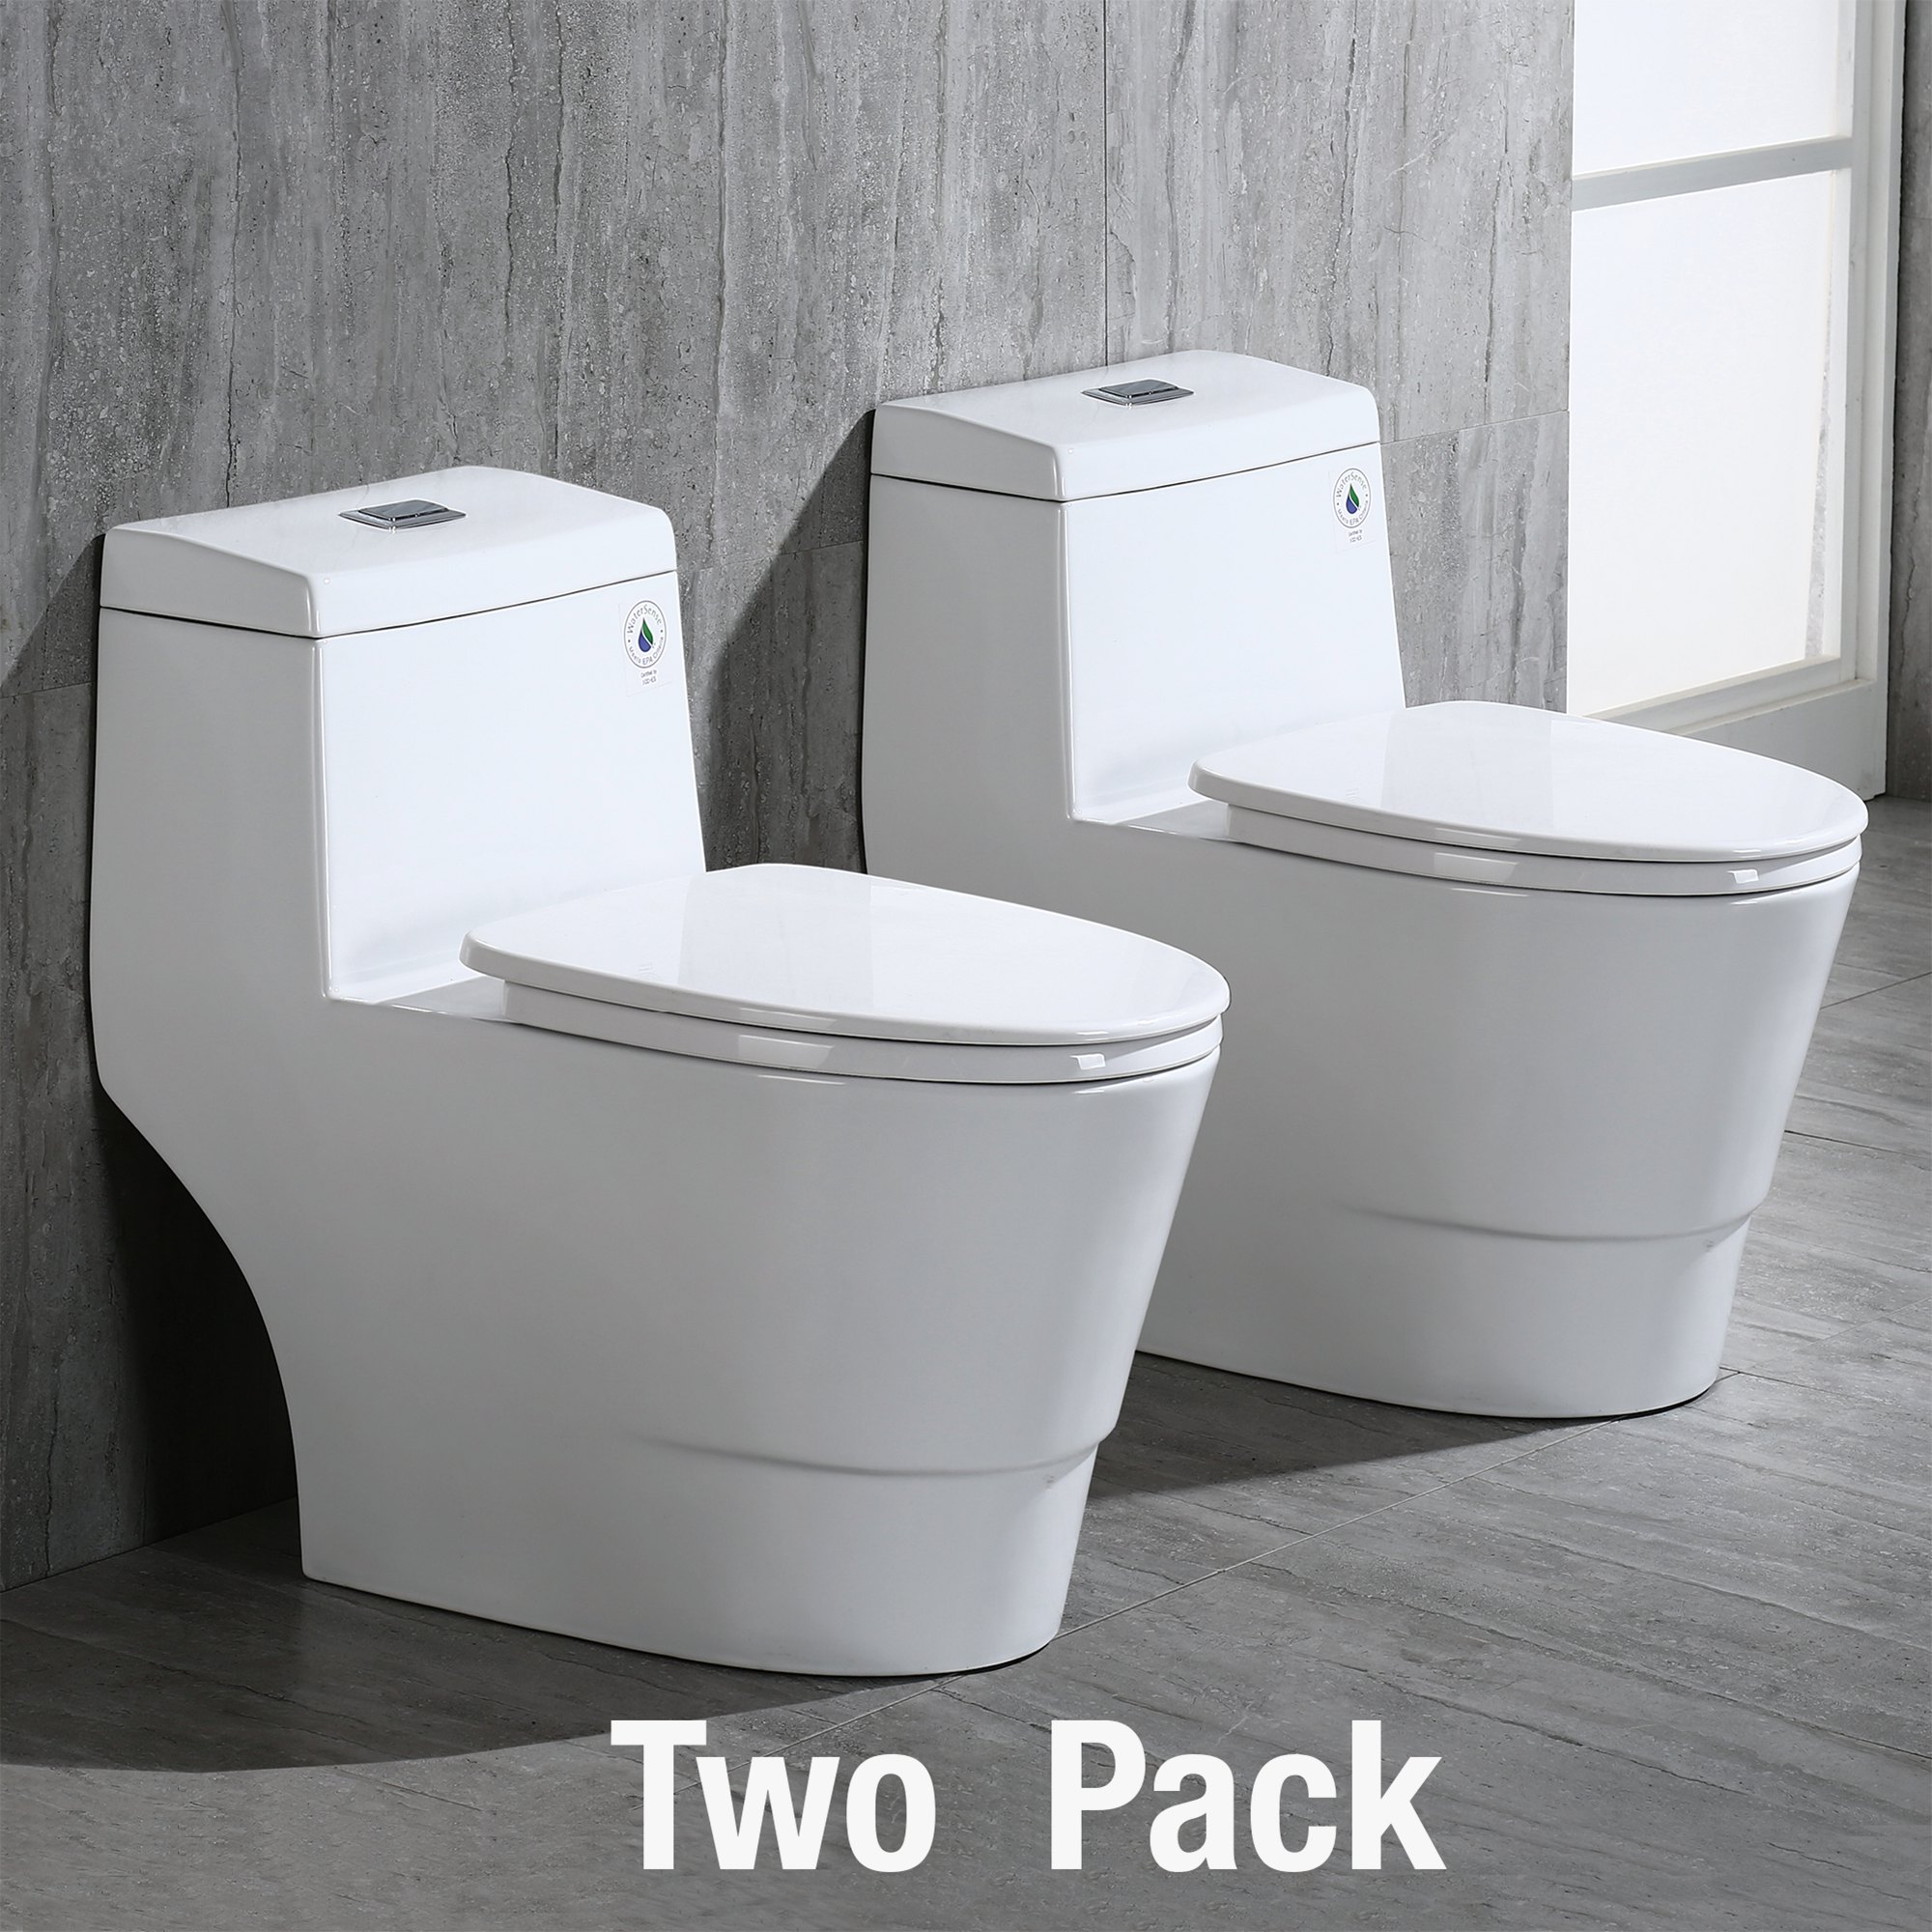 WOODBRIDGEBath T-0019, Dual Flush Elongated One Piece Toilet with Soft Closing Seat, Chair Height, Water Sense, High-Efficiency, T-0019 Rectangle Button (2 -Pack)